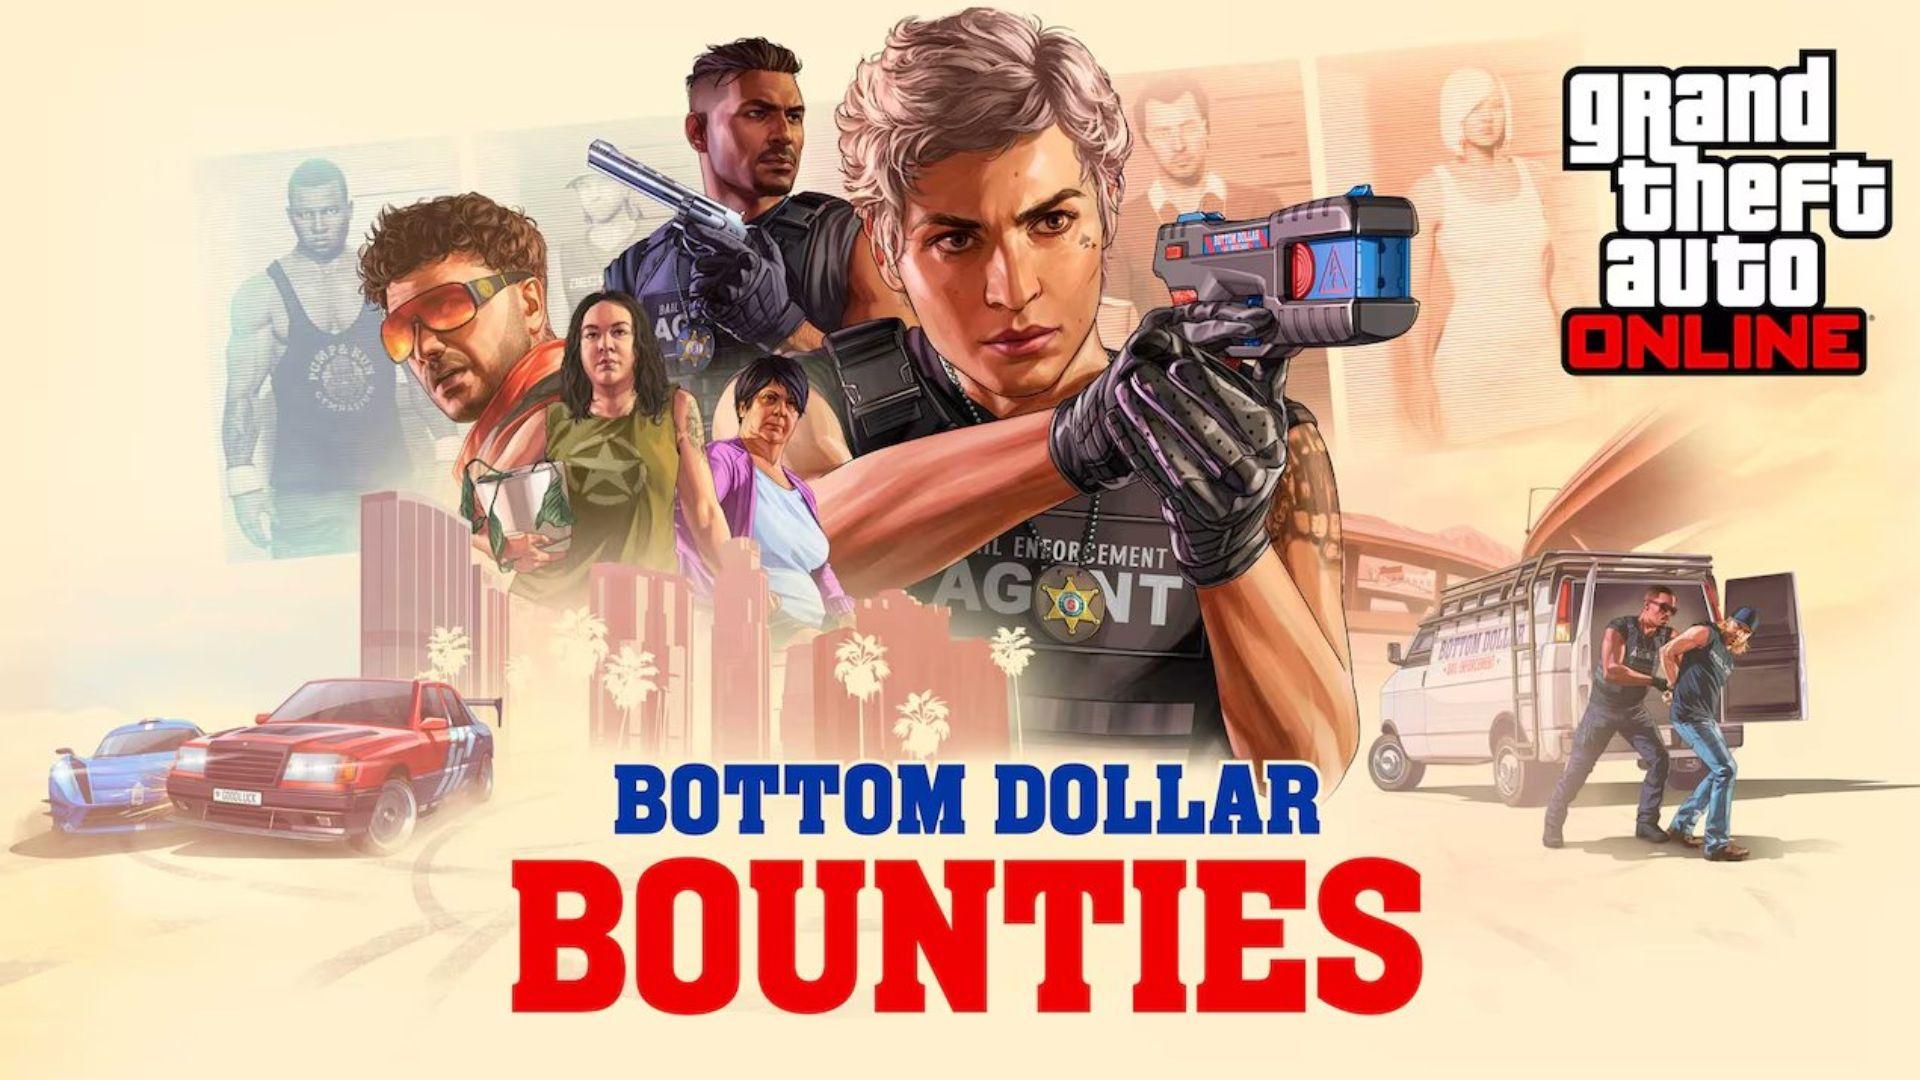 GTA online bottom dollar bounites logo with players being arrested